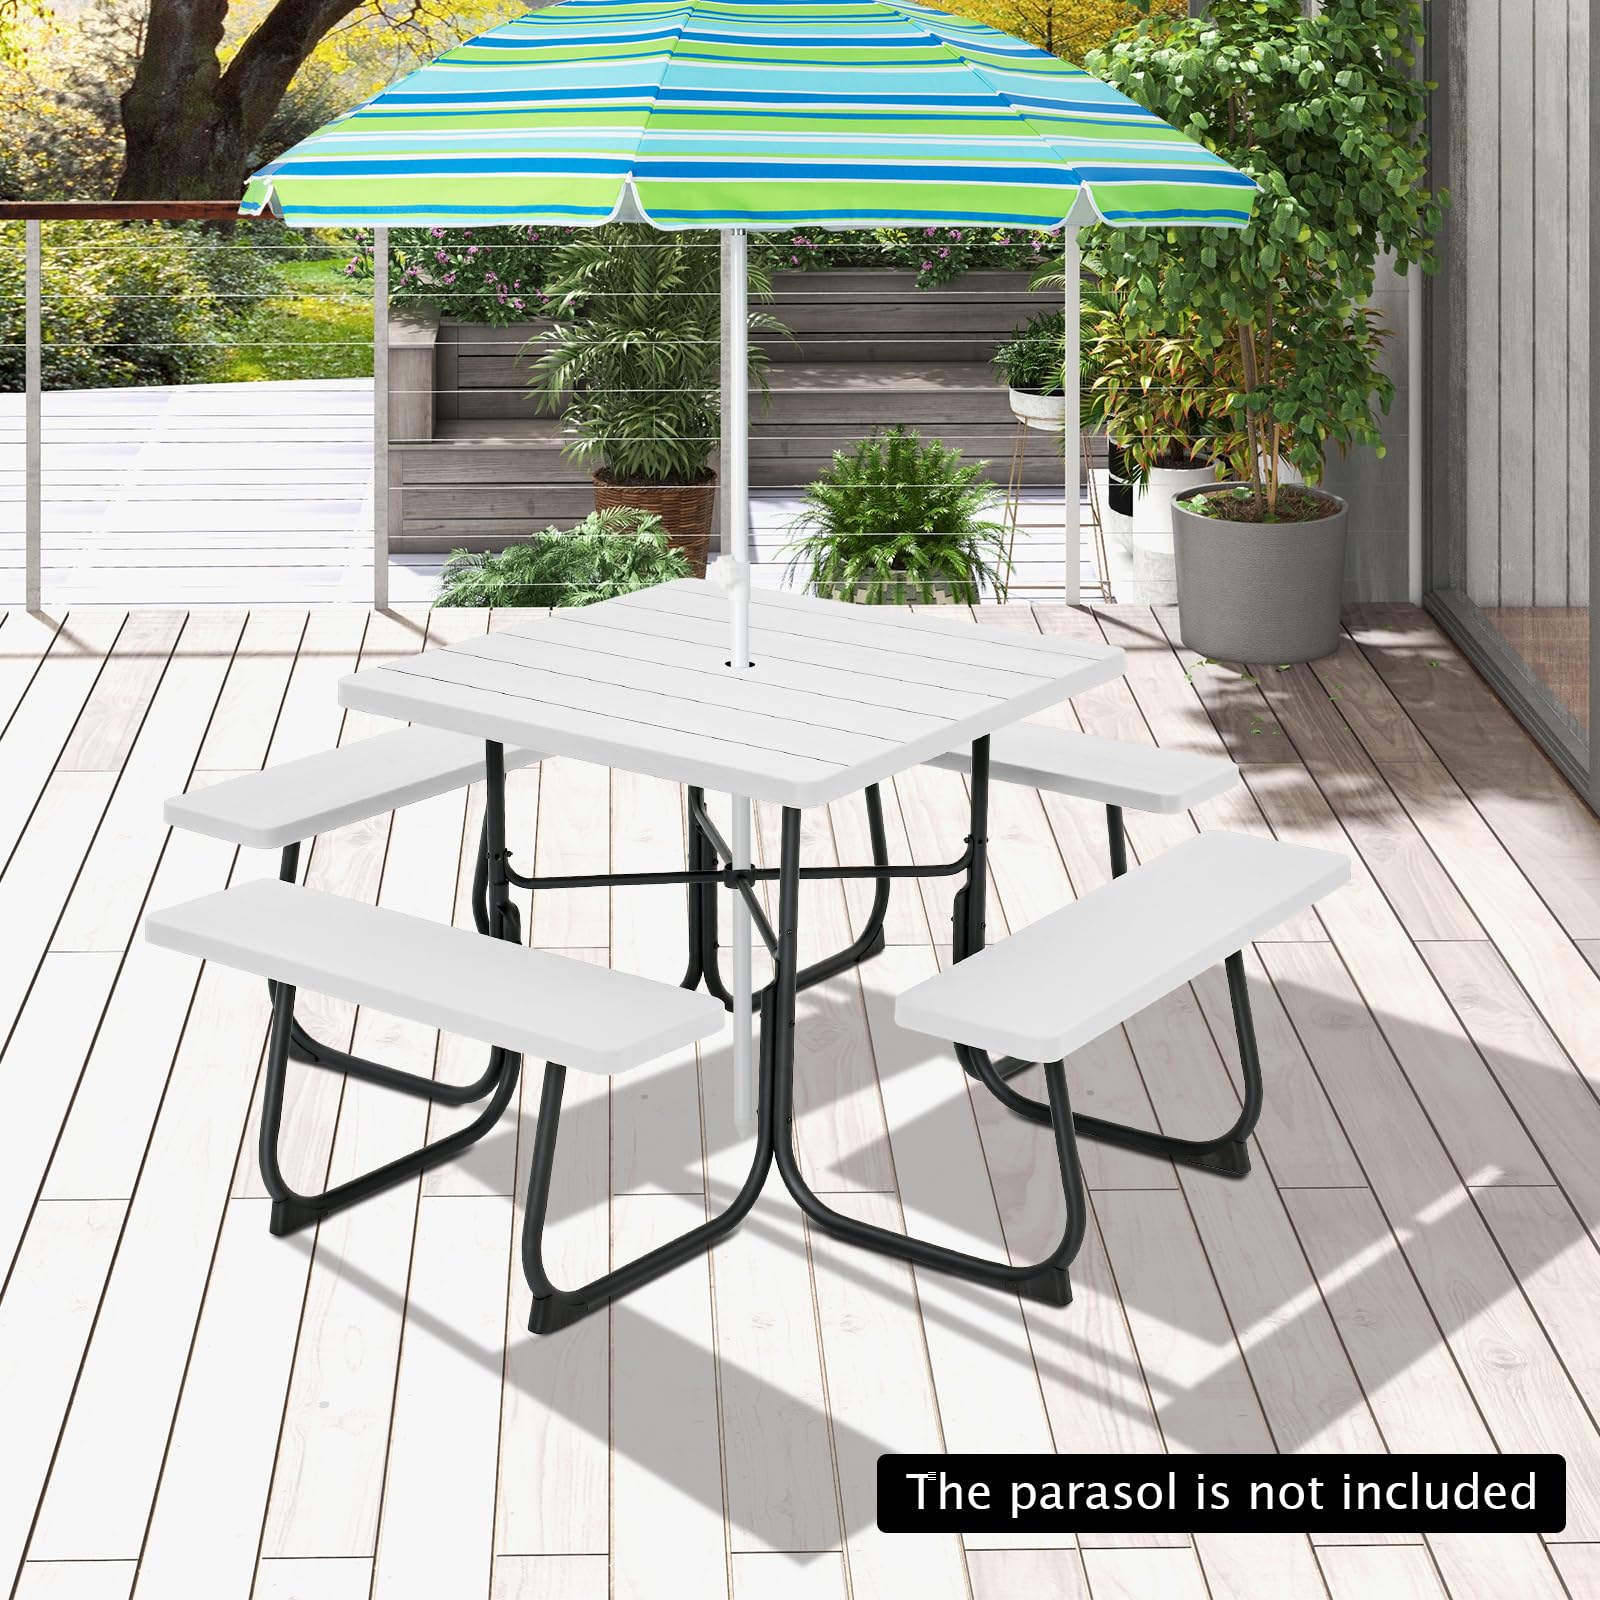 Giantex Picnic Table Set for 4-8 Persons, Outdoor Table and Bench Set with Umbrella Hole, HDPE Top & Metal Frame